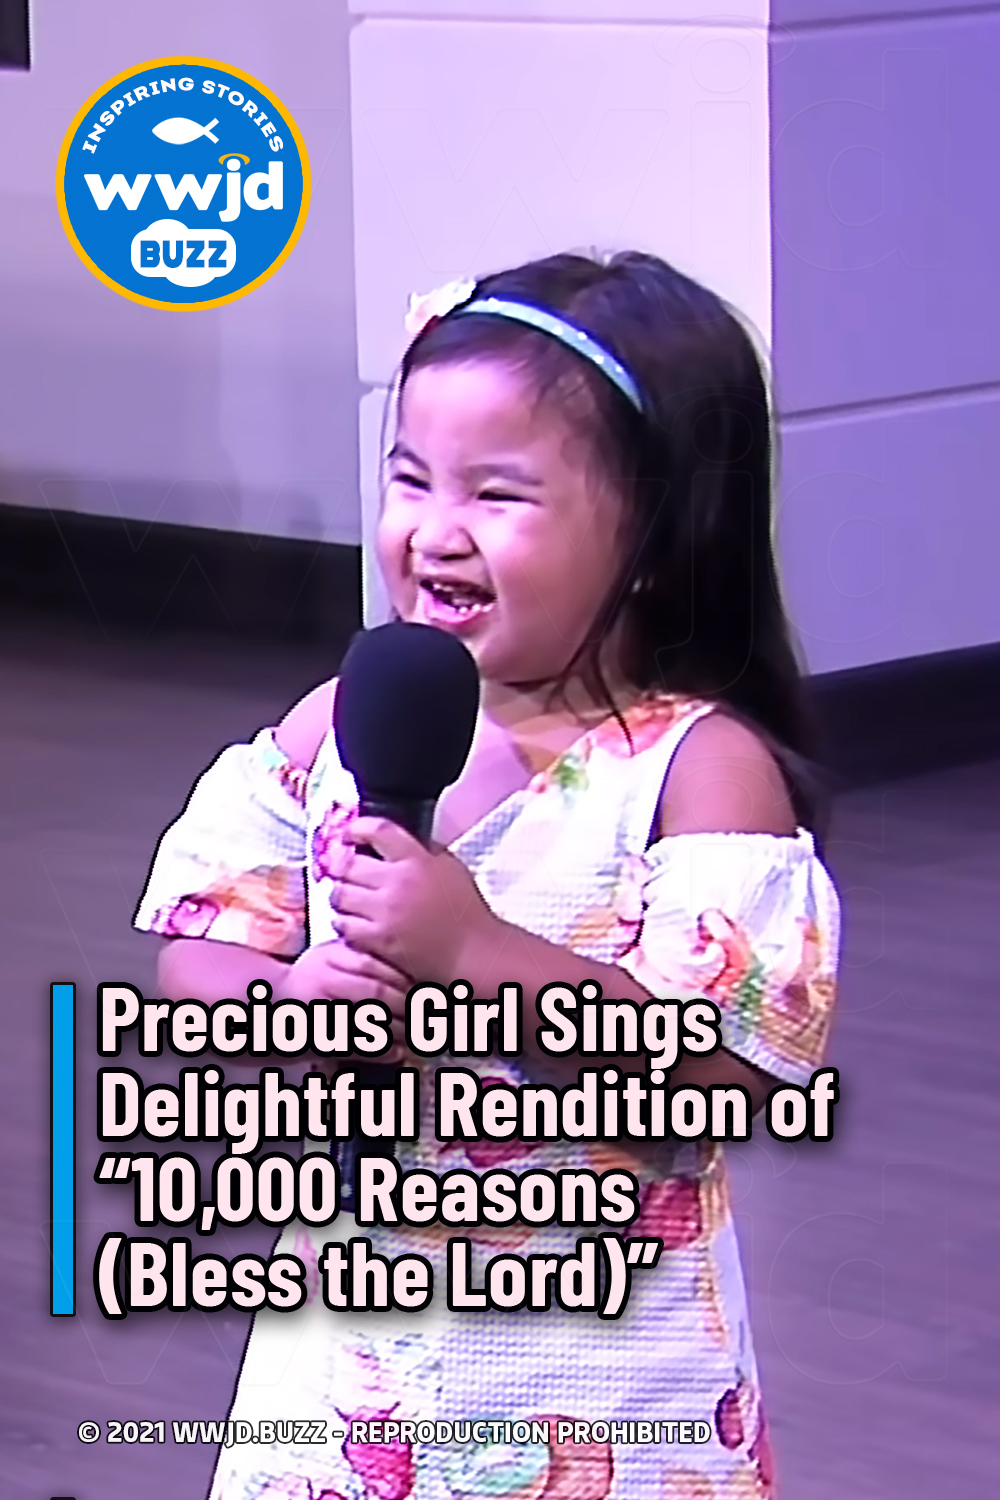 Precious Girl Sings Delightful Rendition of “10,000 Reasons (Bless the Lord)”